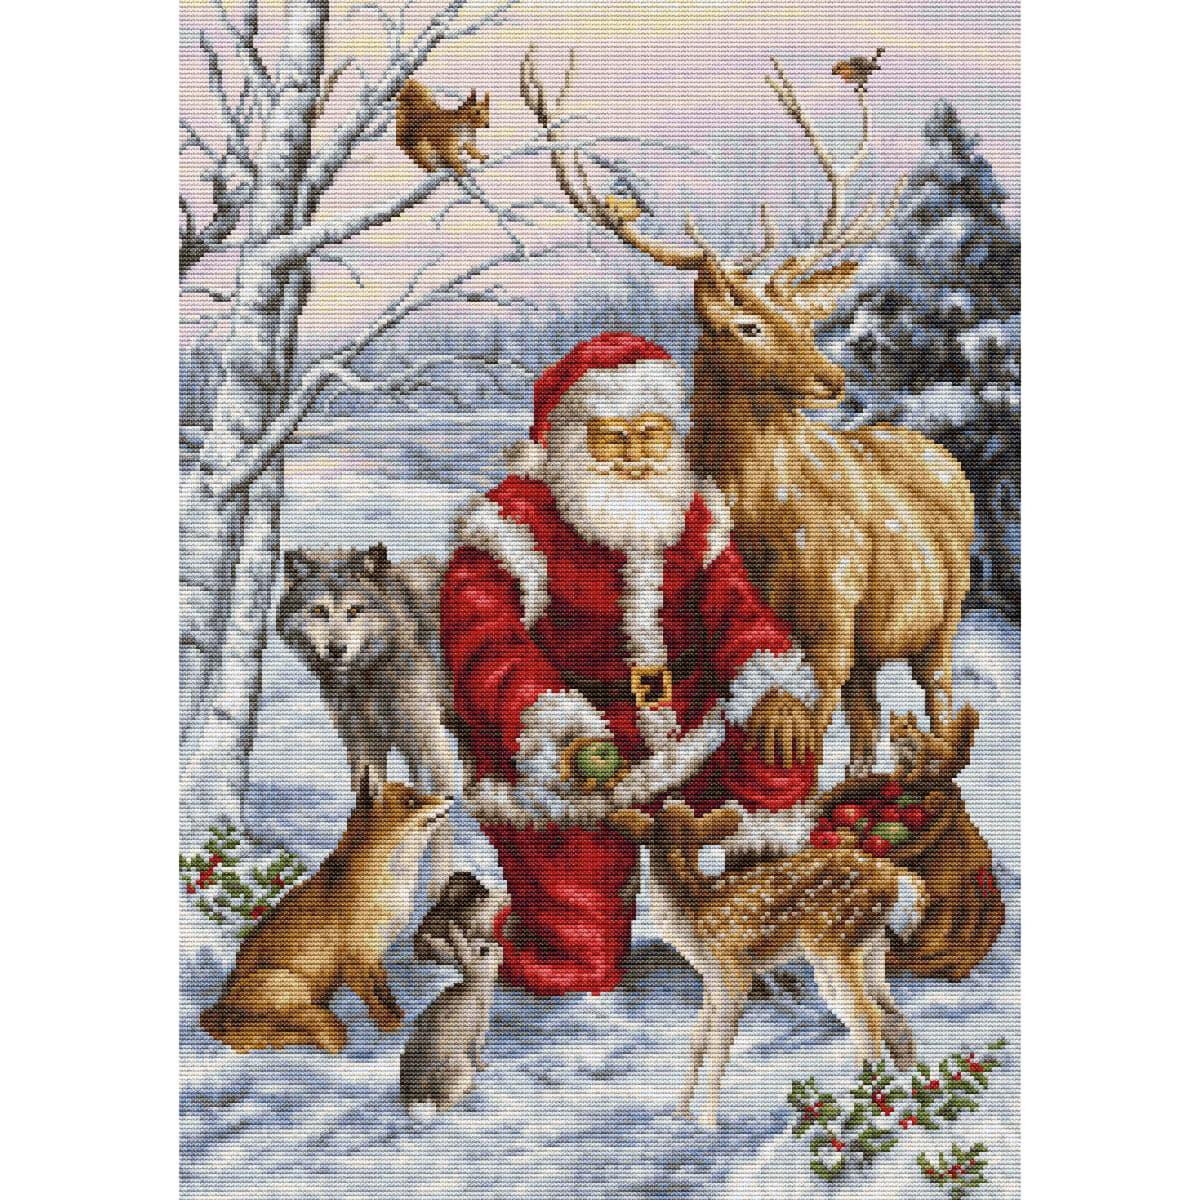 Santa Claus is standing in a snowy forest, surrounded by...